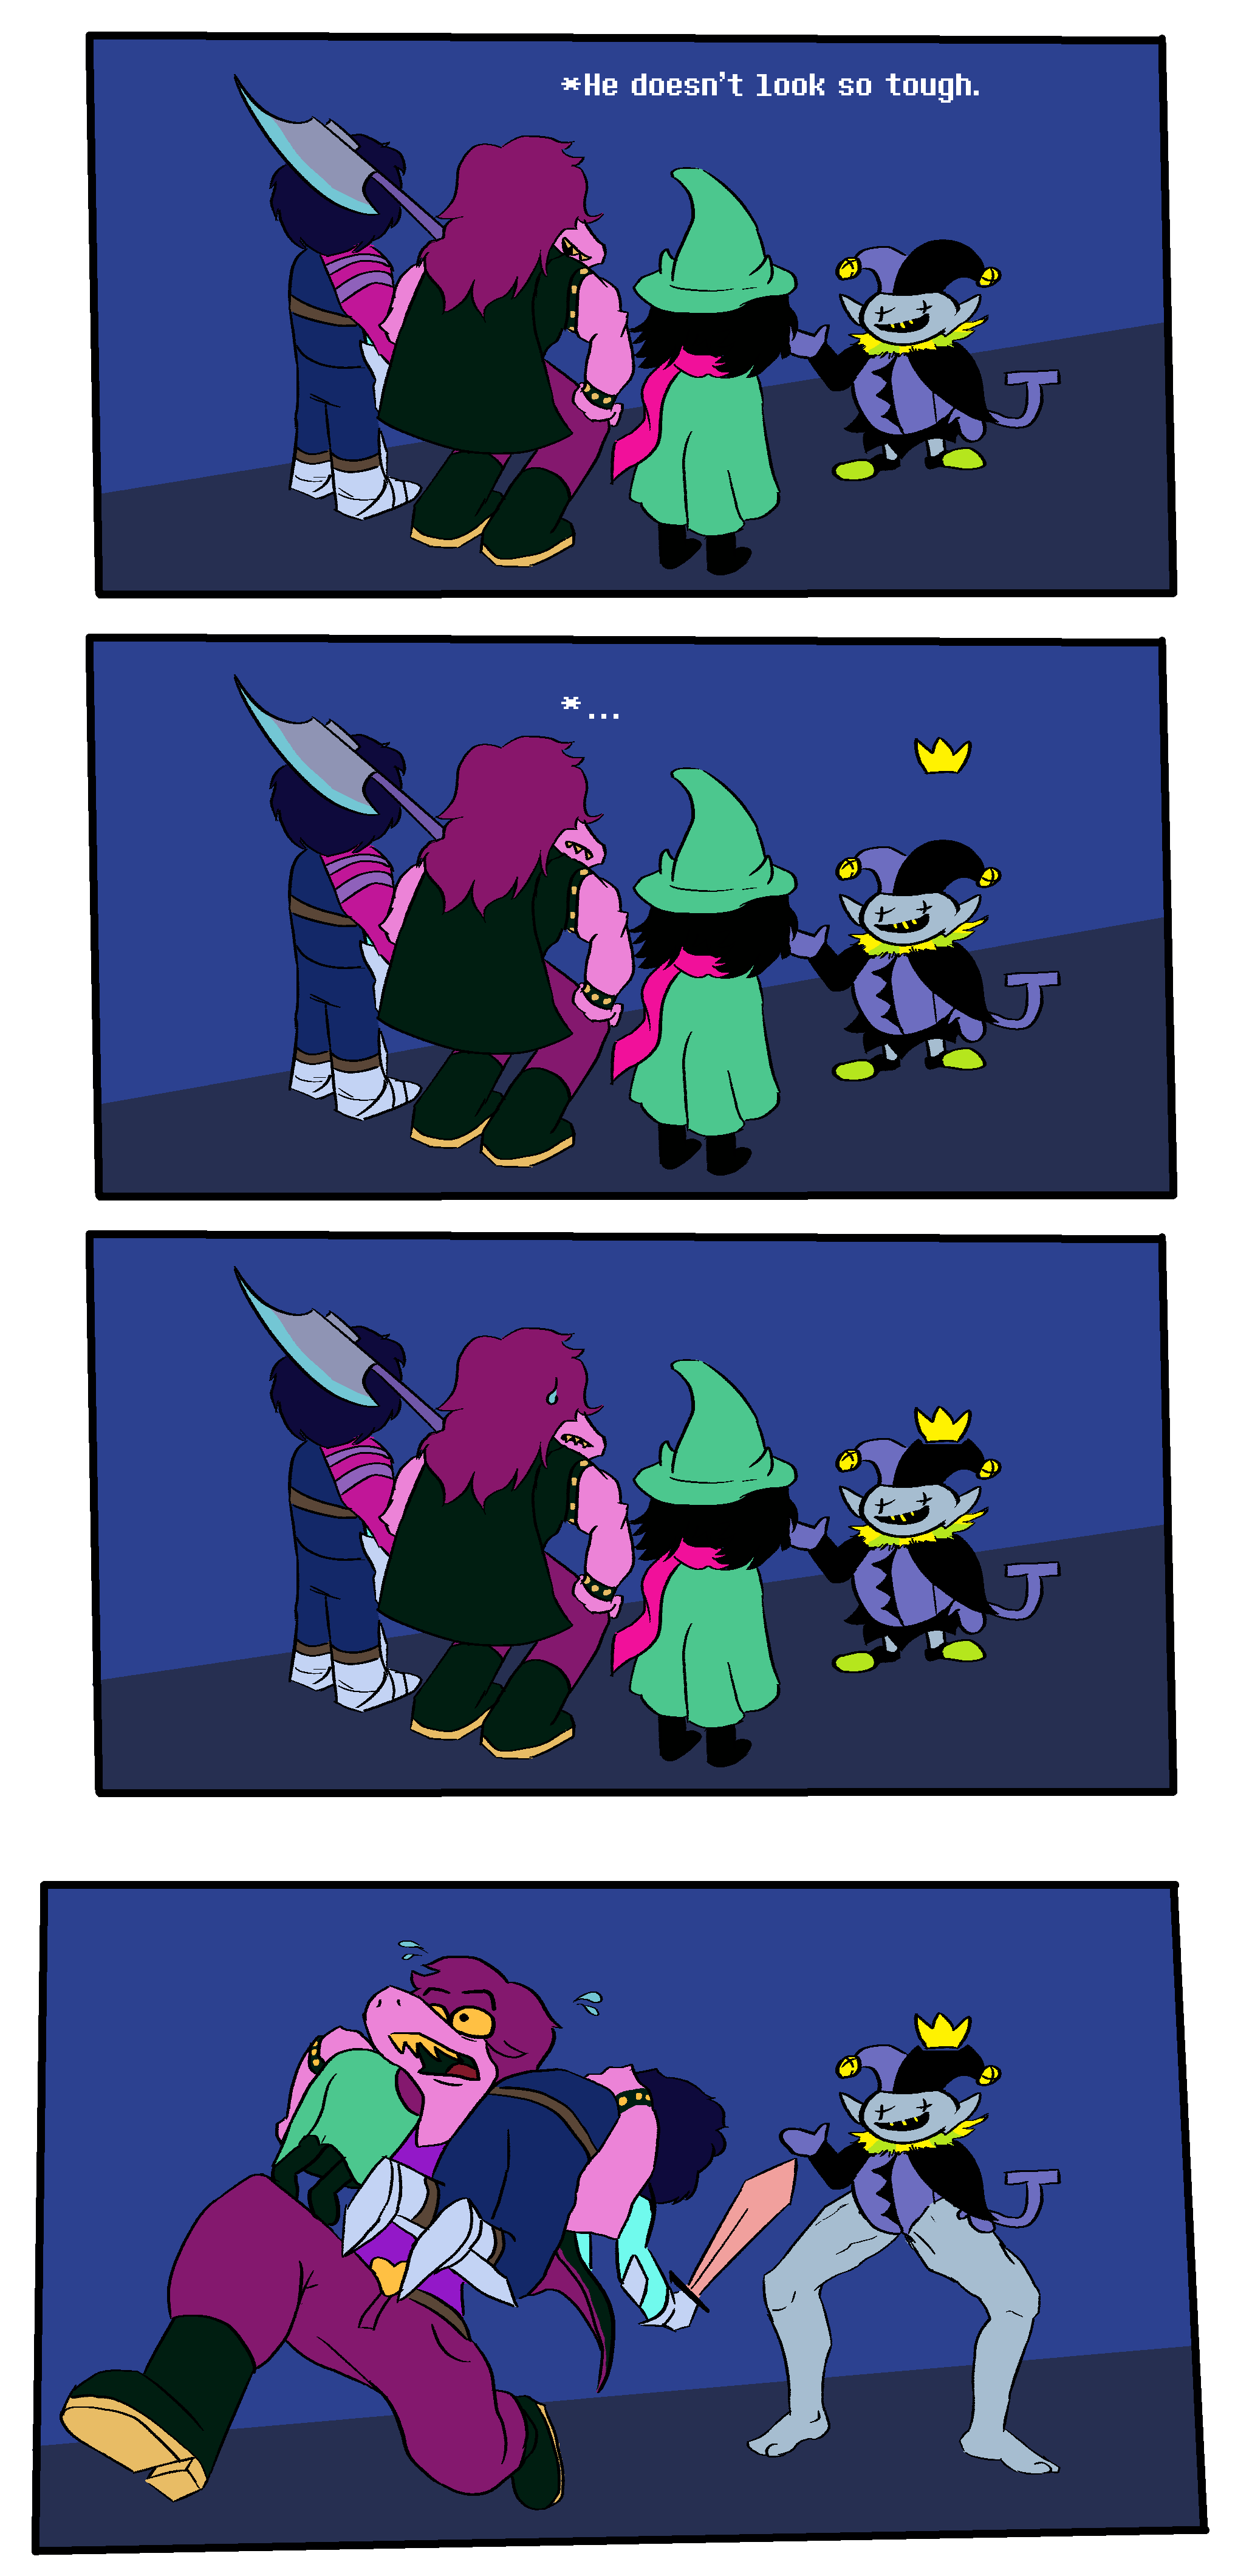 Jevil get's a leg up on the competition